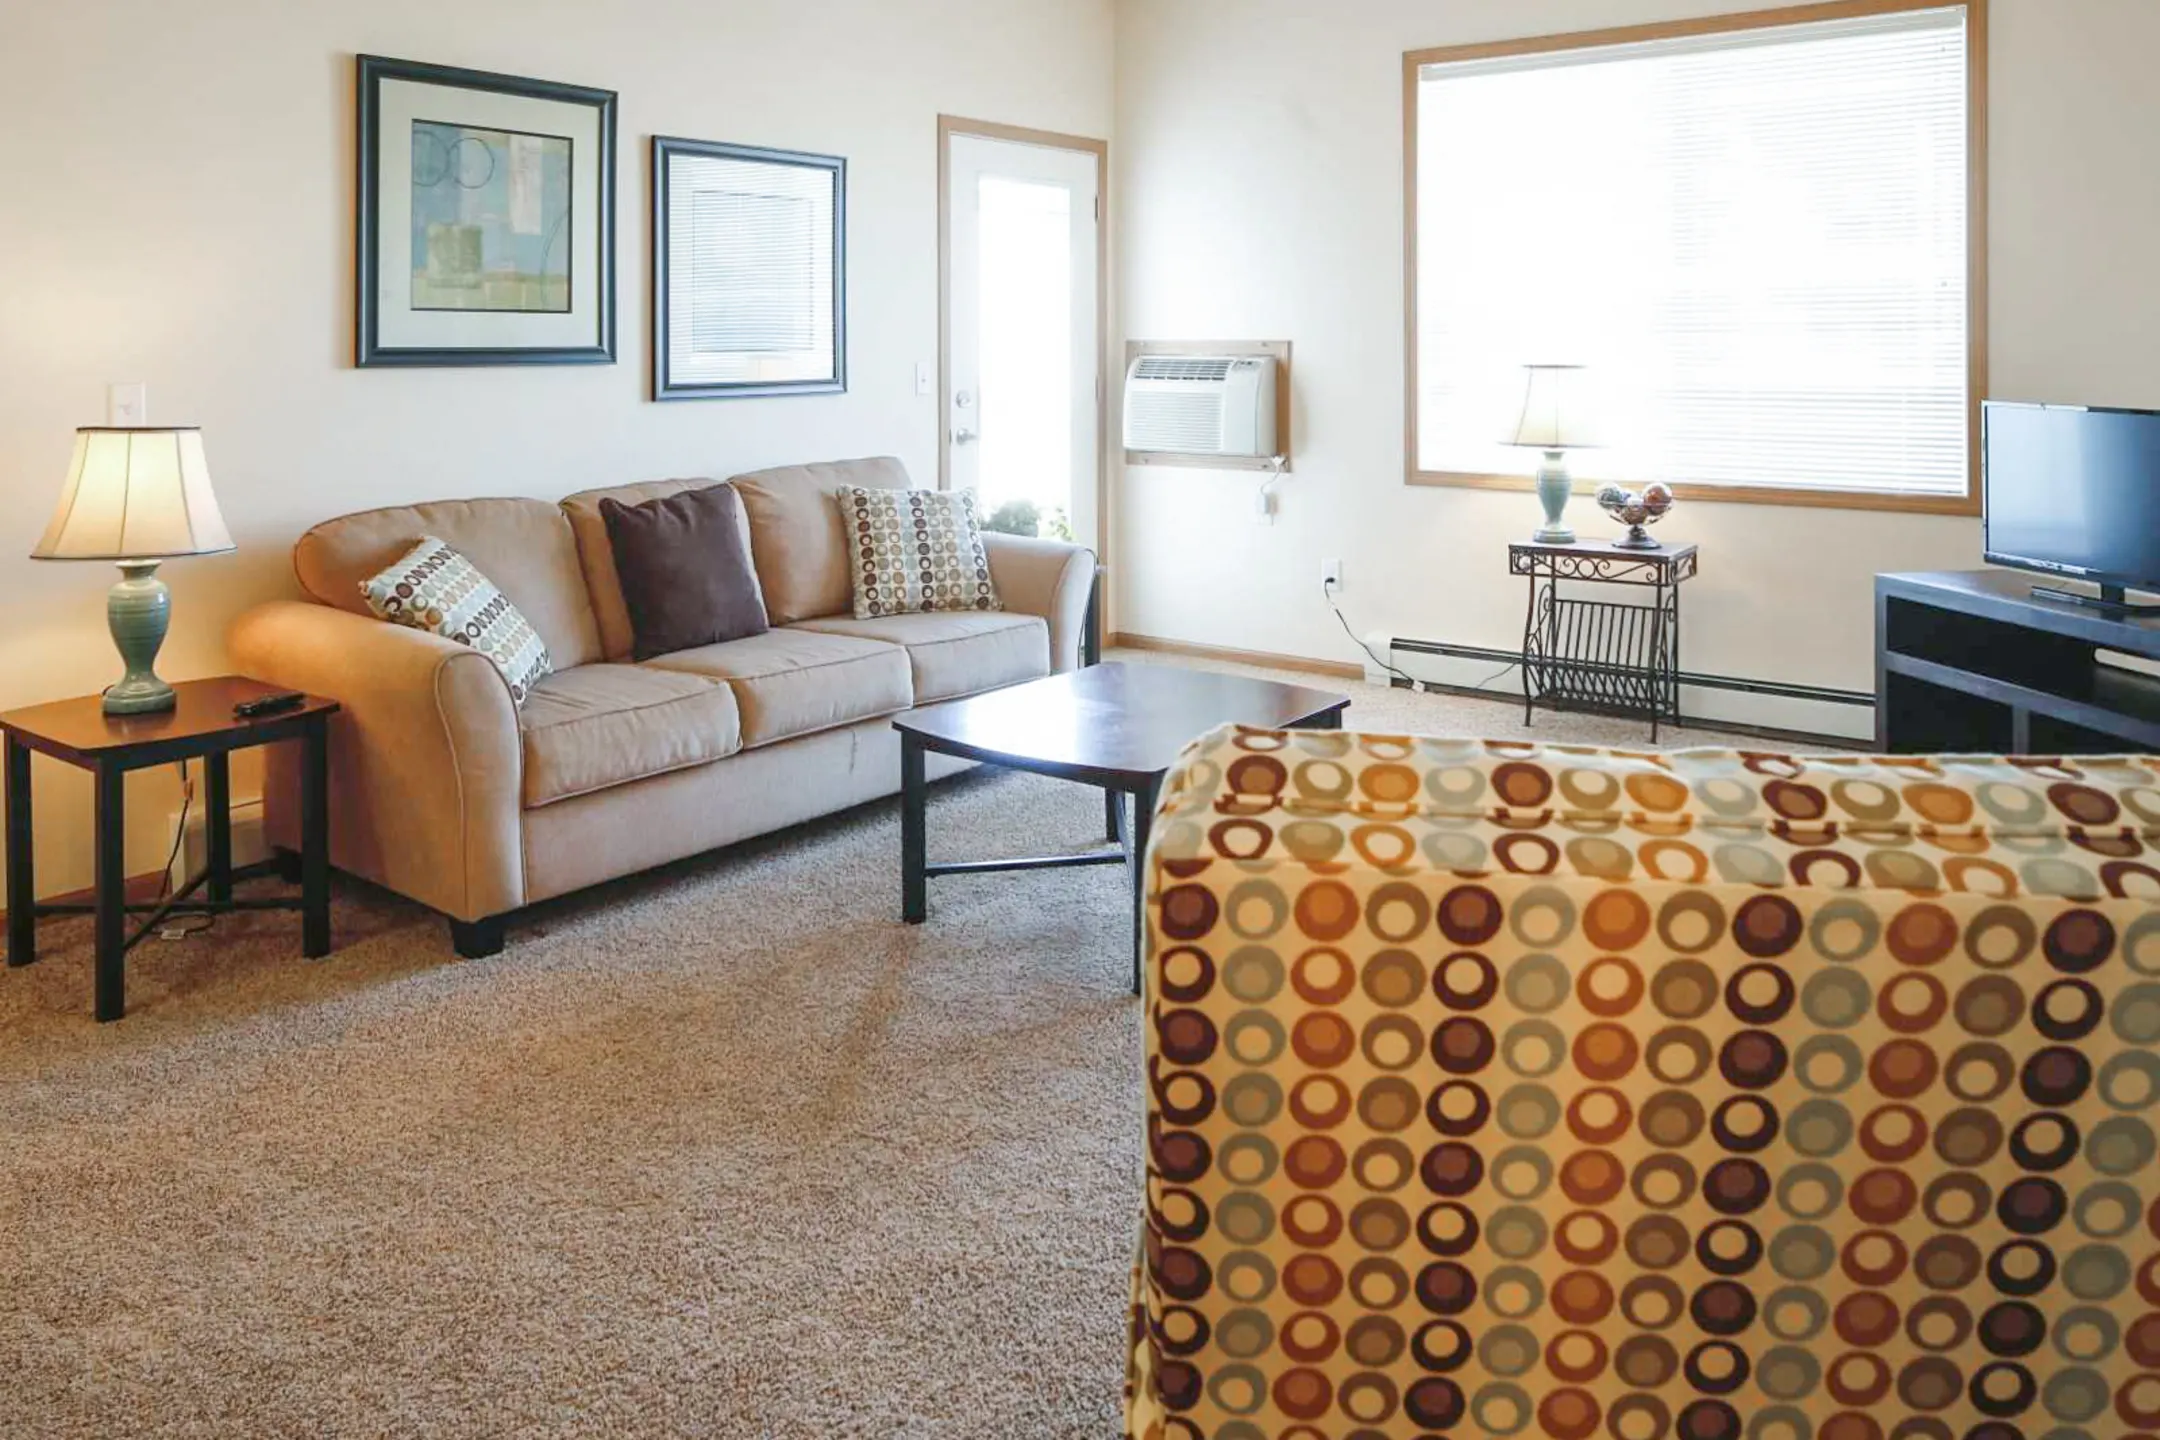 Living Room - Amber Pointe Apartments - Fargo, ND